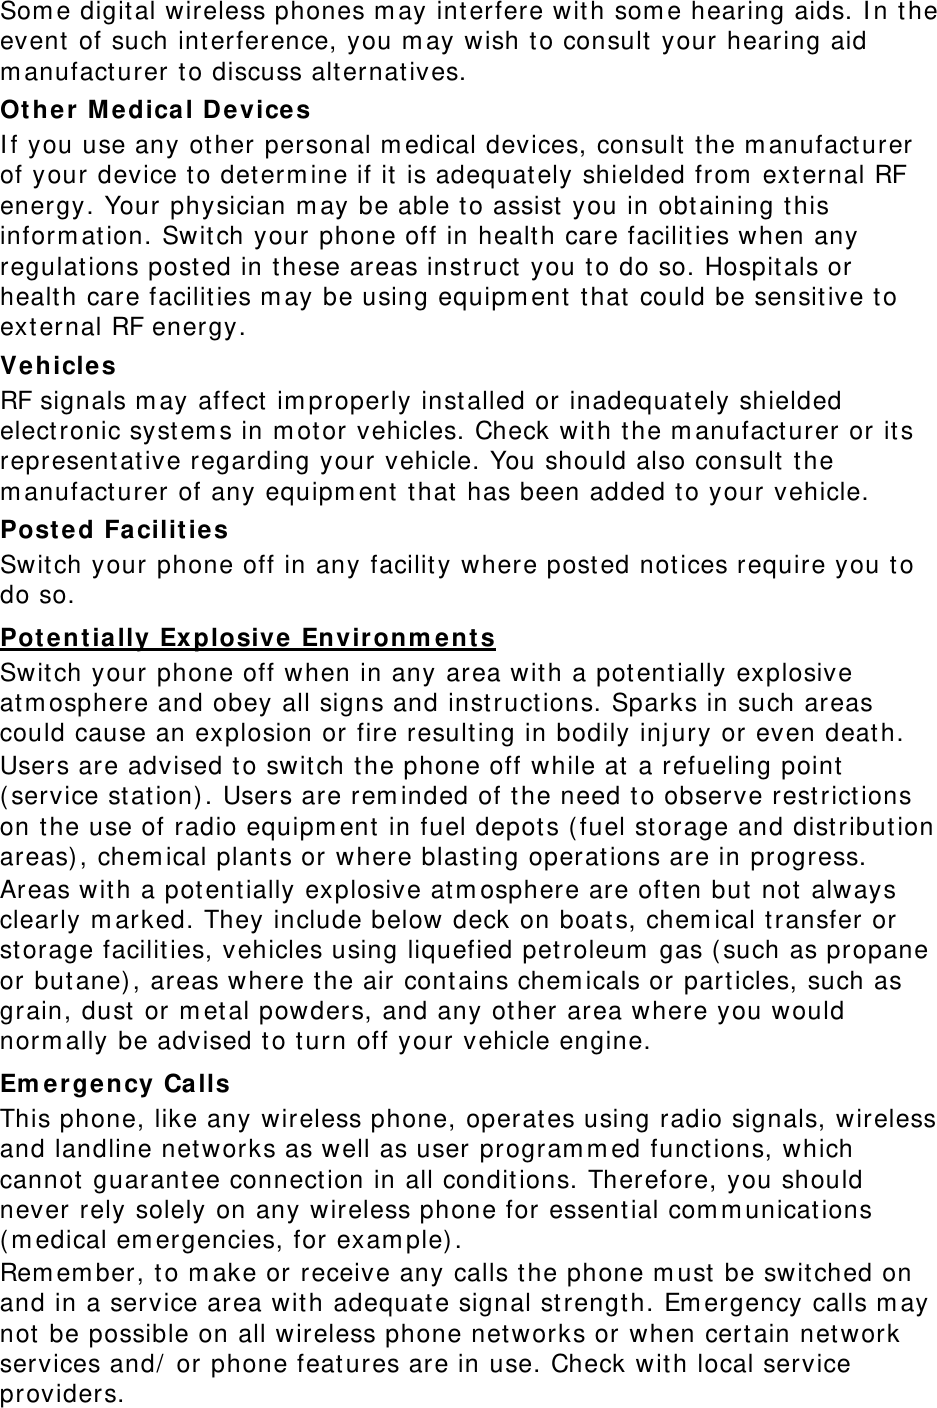 Some digital wireless phones may interfere with some hearing aids. In the event of such interference, you may wish to consult your hearing aid manufacturer to discuss alternatives. Other Medical Devices If you use any other personal medical devices, consult the manufacturer of your device to determine if it is adequately shielded from external RF energy. Your physician may be able to assist you in obtaining this information. Switch your phone off in health care facilities when any regulations posted in these areas instruct you to do so. Hospitals or health care facilities may be using equipment that could be sensitive to external RF energy. Vehicles RF signals may affect improperly installed or inadequately shielded electronic systems in motor vehicles. Check with the manufacturer or its representative regarding your vehicle. You should also consult the manufacturer of any equipment that has been added to your vehicle. Posted Facilities Switch your phone off in any facility where posted notices require you to do so. Potentially Explosive Environments Switch your phone off when in any area with a potentially explosive atmosphere and obey all signs and instructions. Sparks in such areas could cause an explosion or fire resulting in bodily injury or even death. Users are advised to switch the phone off while at a refueling point (service station). Users are reminded of the need to observe restrictions on the use of radio equipment in fuel depots (fuel storage and distribution areas), chemical plants or where blasting operations are in progress. Areas with a potentially explosive atmosphere are often but not always clearly marked. They include below deck on boats, chemical transfer or storage facilities, vehicles using liquefied petroleum gas (such as propane or butane), areas where the air contains chemicals or particles, such as grain, dust or metal powders, and any other area where you would normally be advised to turn off your vehicle engine. Emergency Calls This phone, like any wireless phone, operates using radio signals, wireless and landline networks as well as user programmed functions, which cannot guarantee connection in all conditions. Therefore, you should never rely solely on any wireless phone for essential communications (medical emergencies, for example). Remember, to make or receive any calls the phone must be switched on and in a service area with adequate signal strength. Emergency calls may not be possible on all wireless phone networks or when certain network services and/ or phone features are in use. Check with local service providers. 